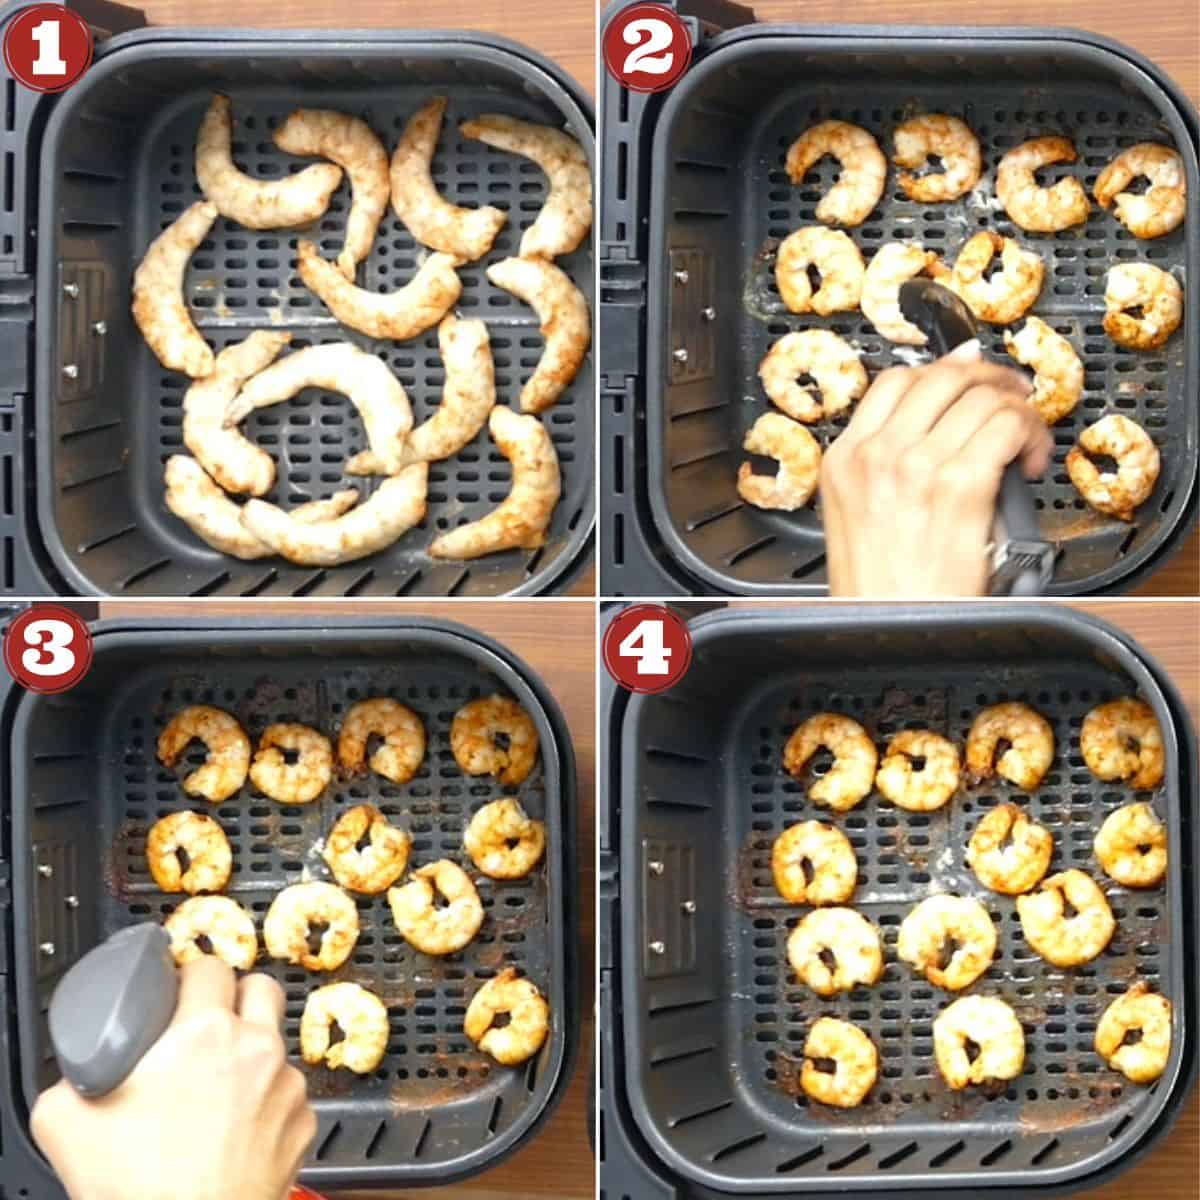 collage of shrimp in air fryer cooking stages - frozen shrimp, being flipped, being sprayed, cooked shrimp.